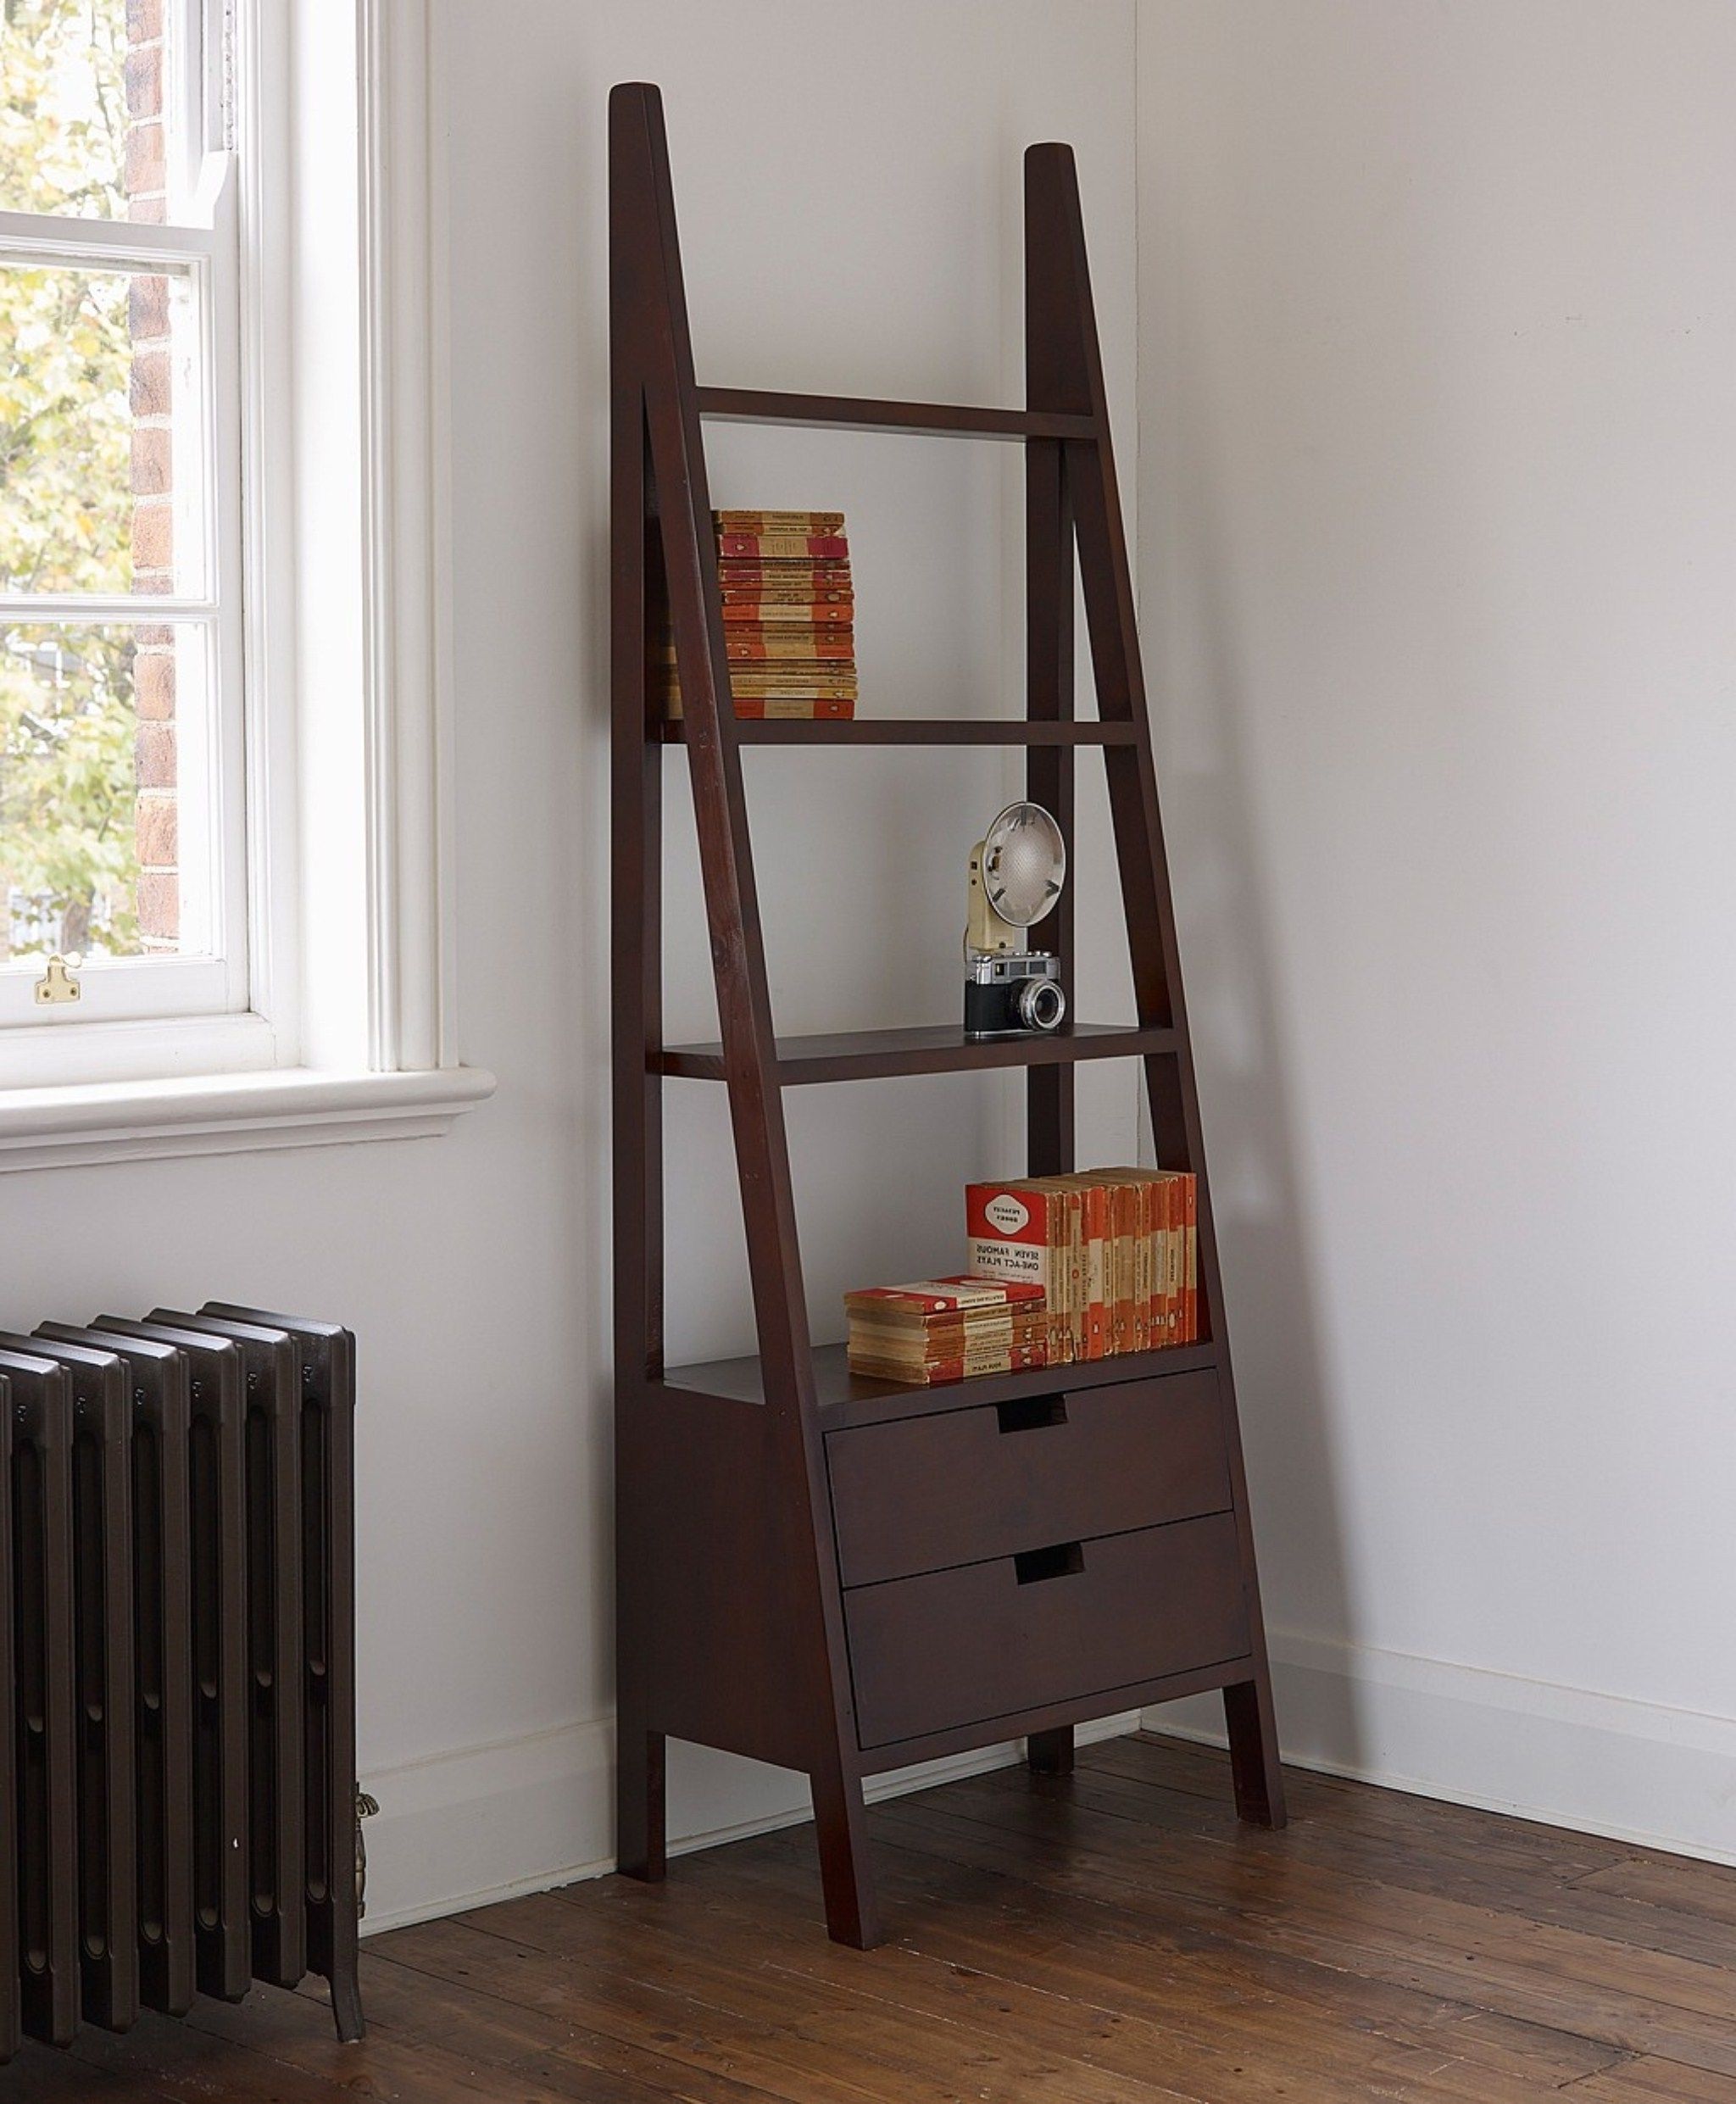 Newest Ladder Bookcases With Drawers Throughout Ladder Bookcase With Drawers For Corner Area Design (View 3 of 15)